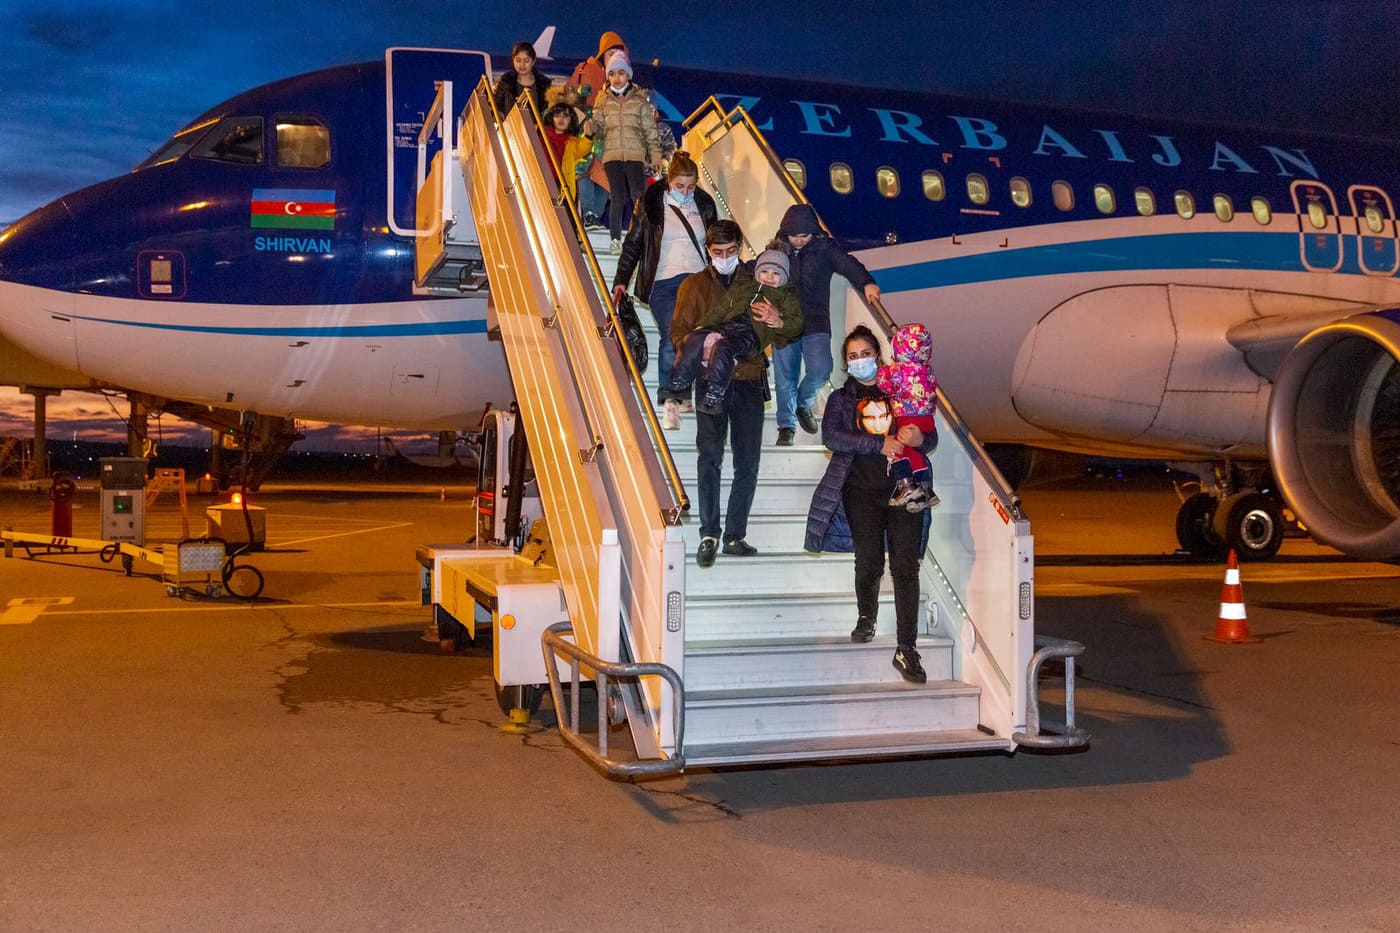 Another group of Azerbaijani citizens evacuated from Ukraine